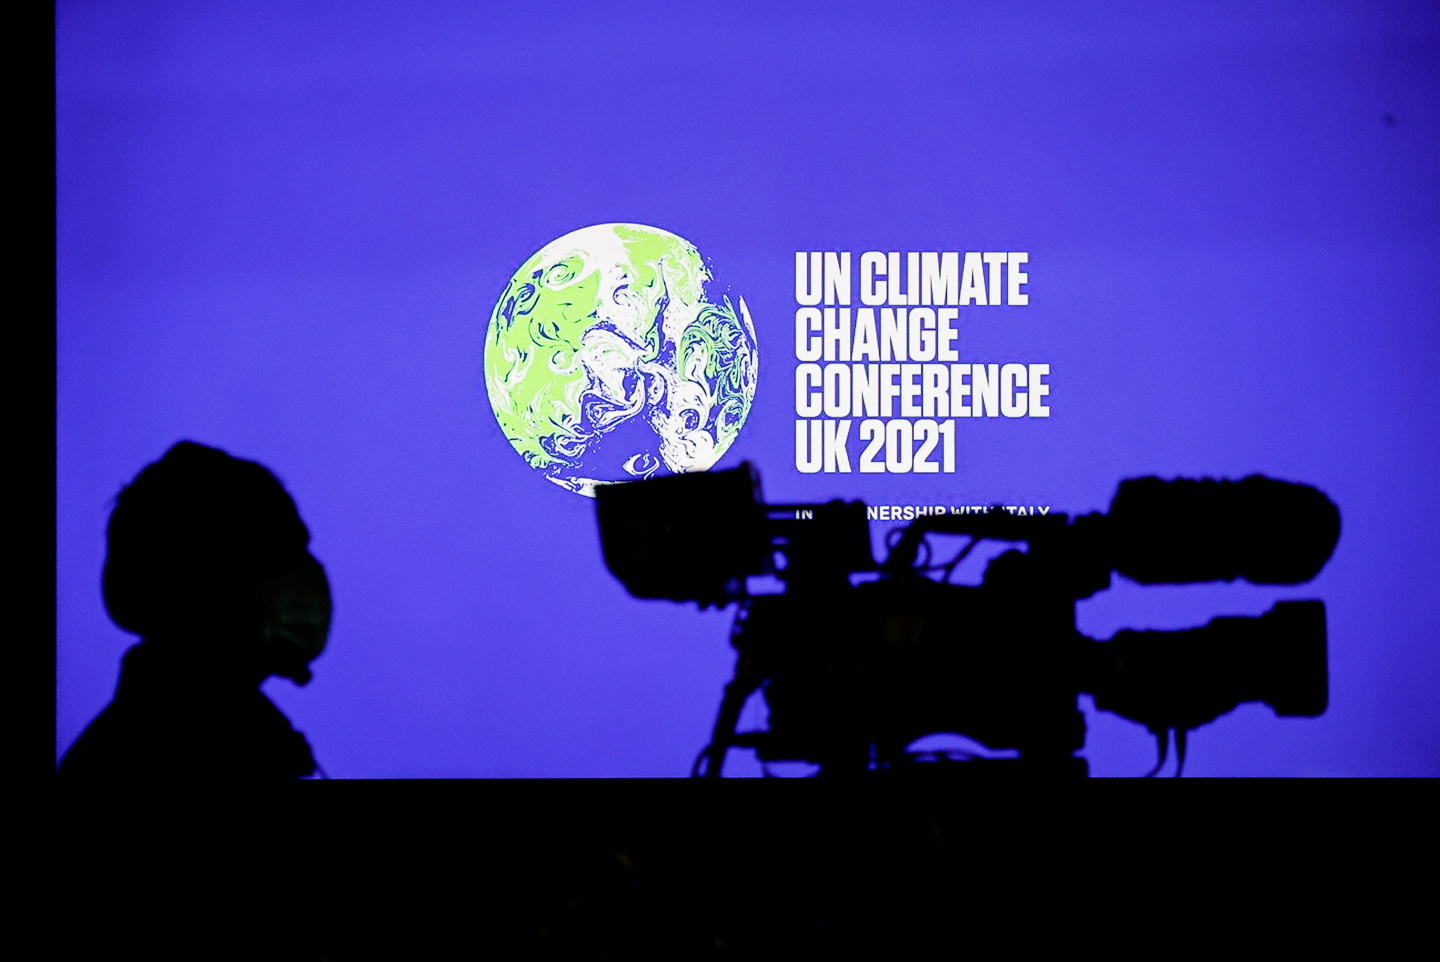 A cameraman sits in front of a screen displaying COP26 logo during a news conference at the UN Climate Change Conference (COP26), in Glasgow, Scotland, Britain, November 5, 2021. REUTERS/Phil Noble